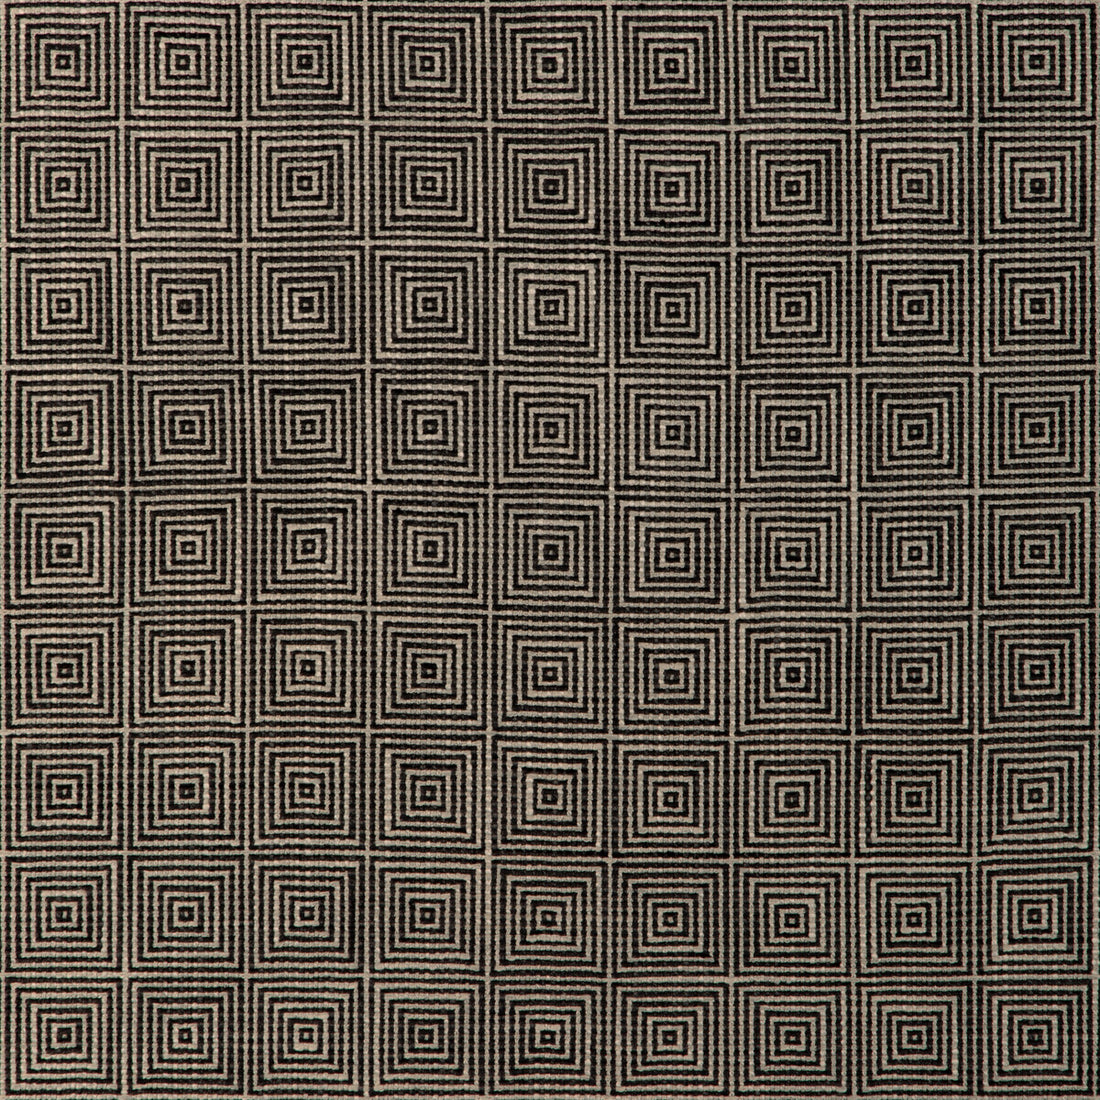 Kravet Design fabric in 37143-8 color - pattern 37143.8.0 - by Kravet Design in the Woven Colors collection